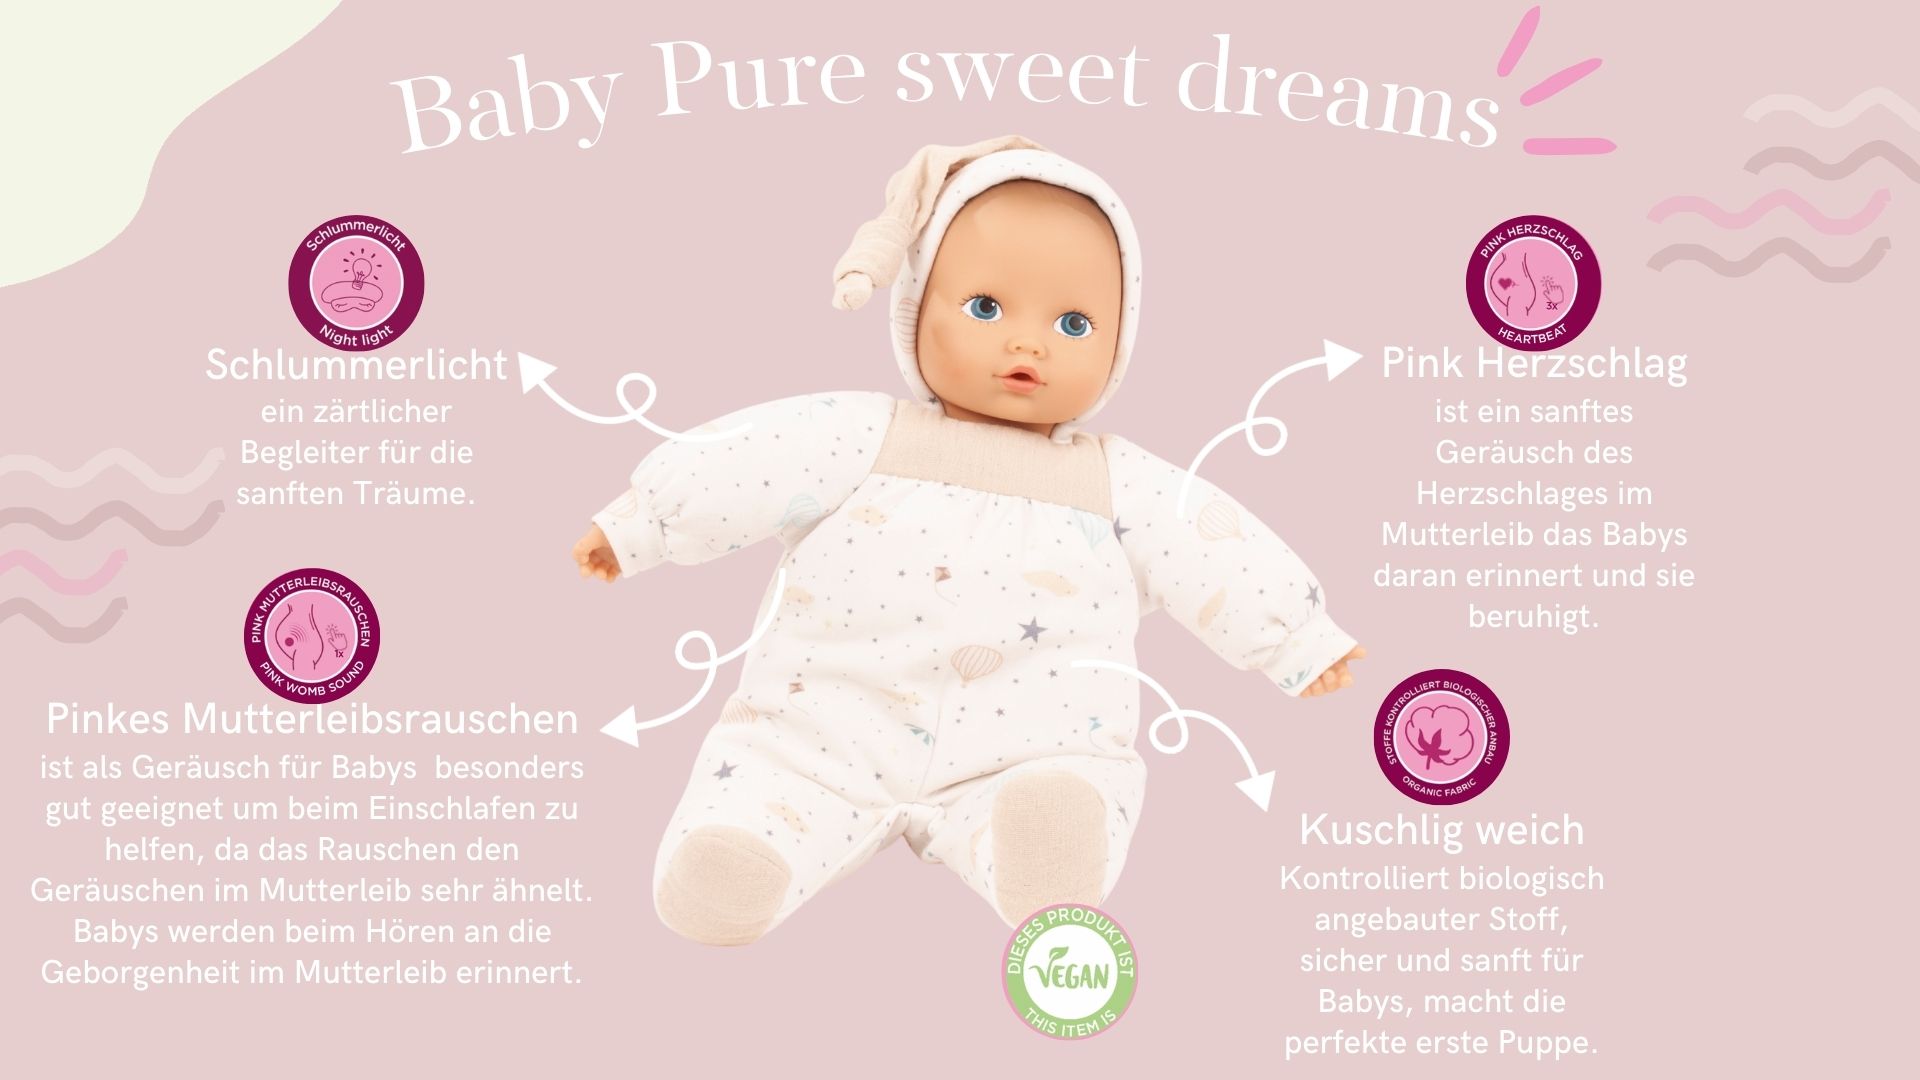 Baby Pure Sweet Dreams with sound